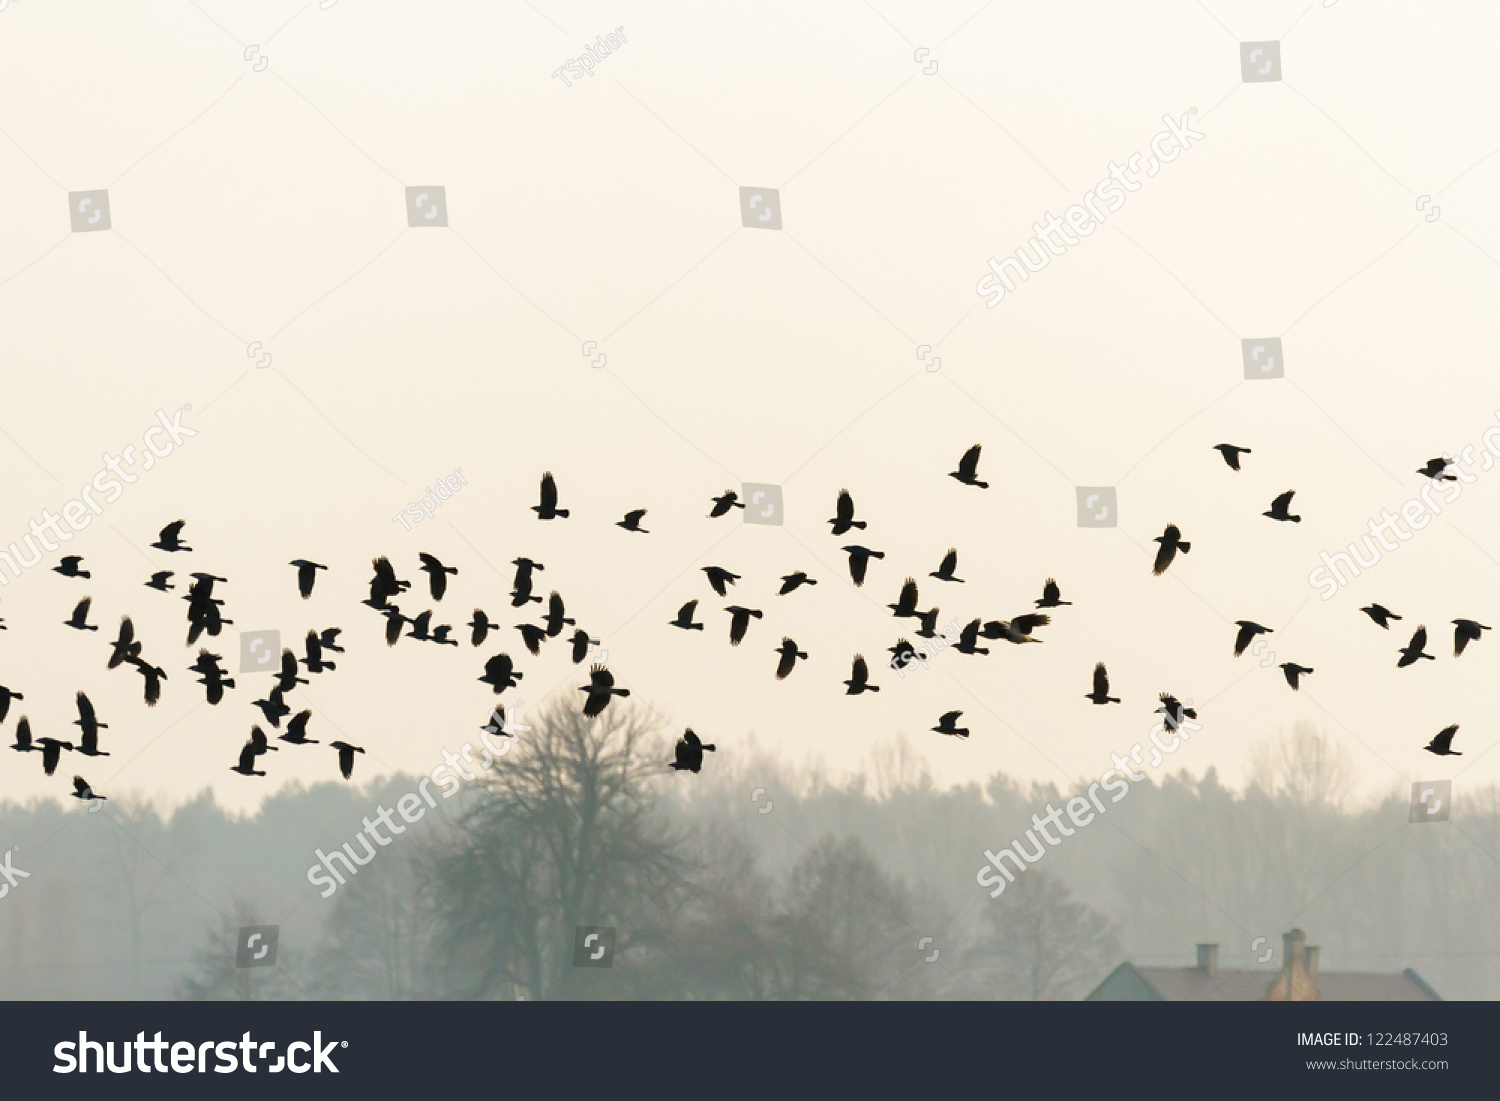 Many Birds Flying Sky Nature Series Stock Photo (Edit Now) 122487403